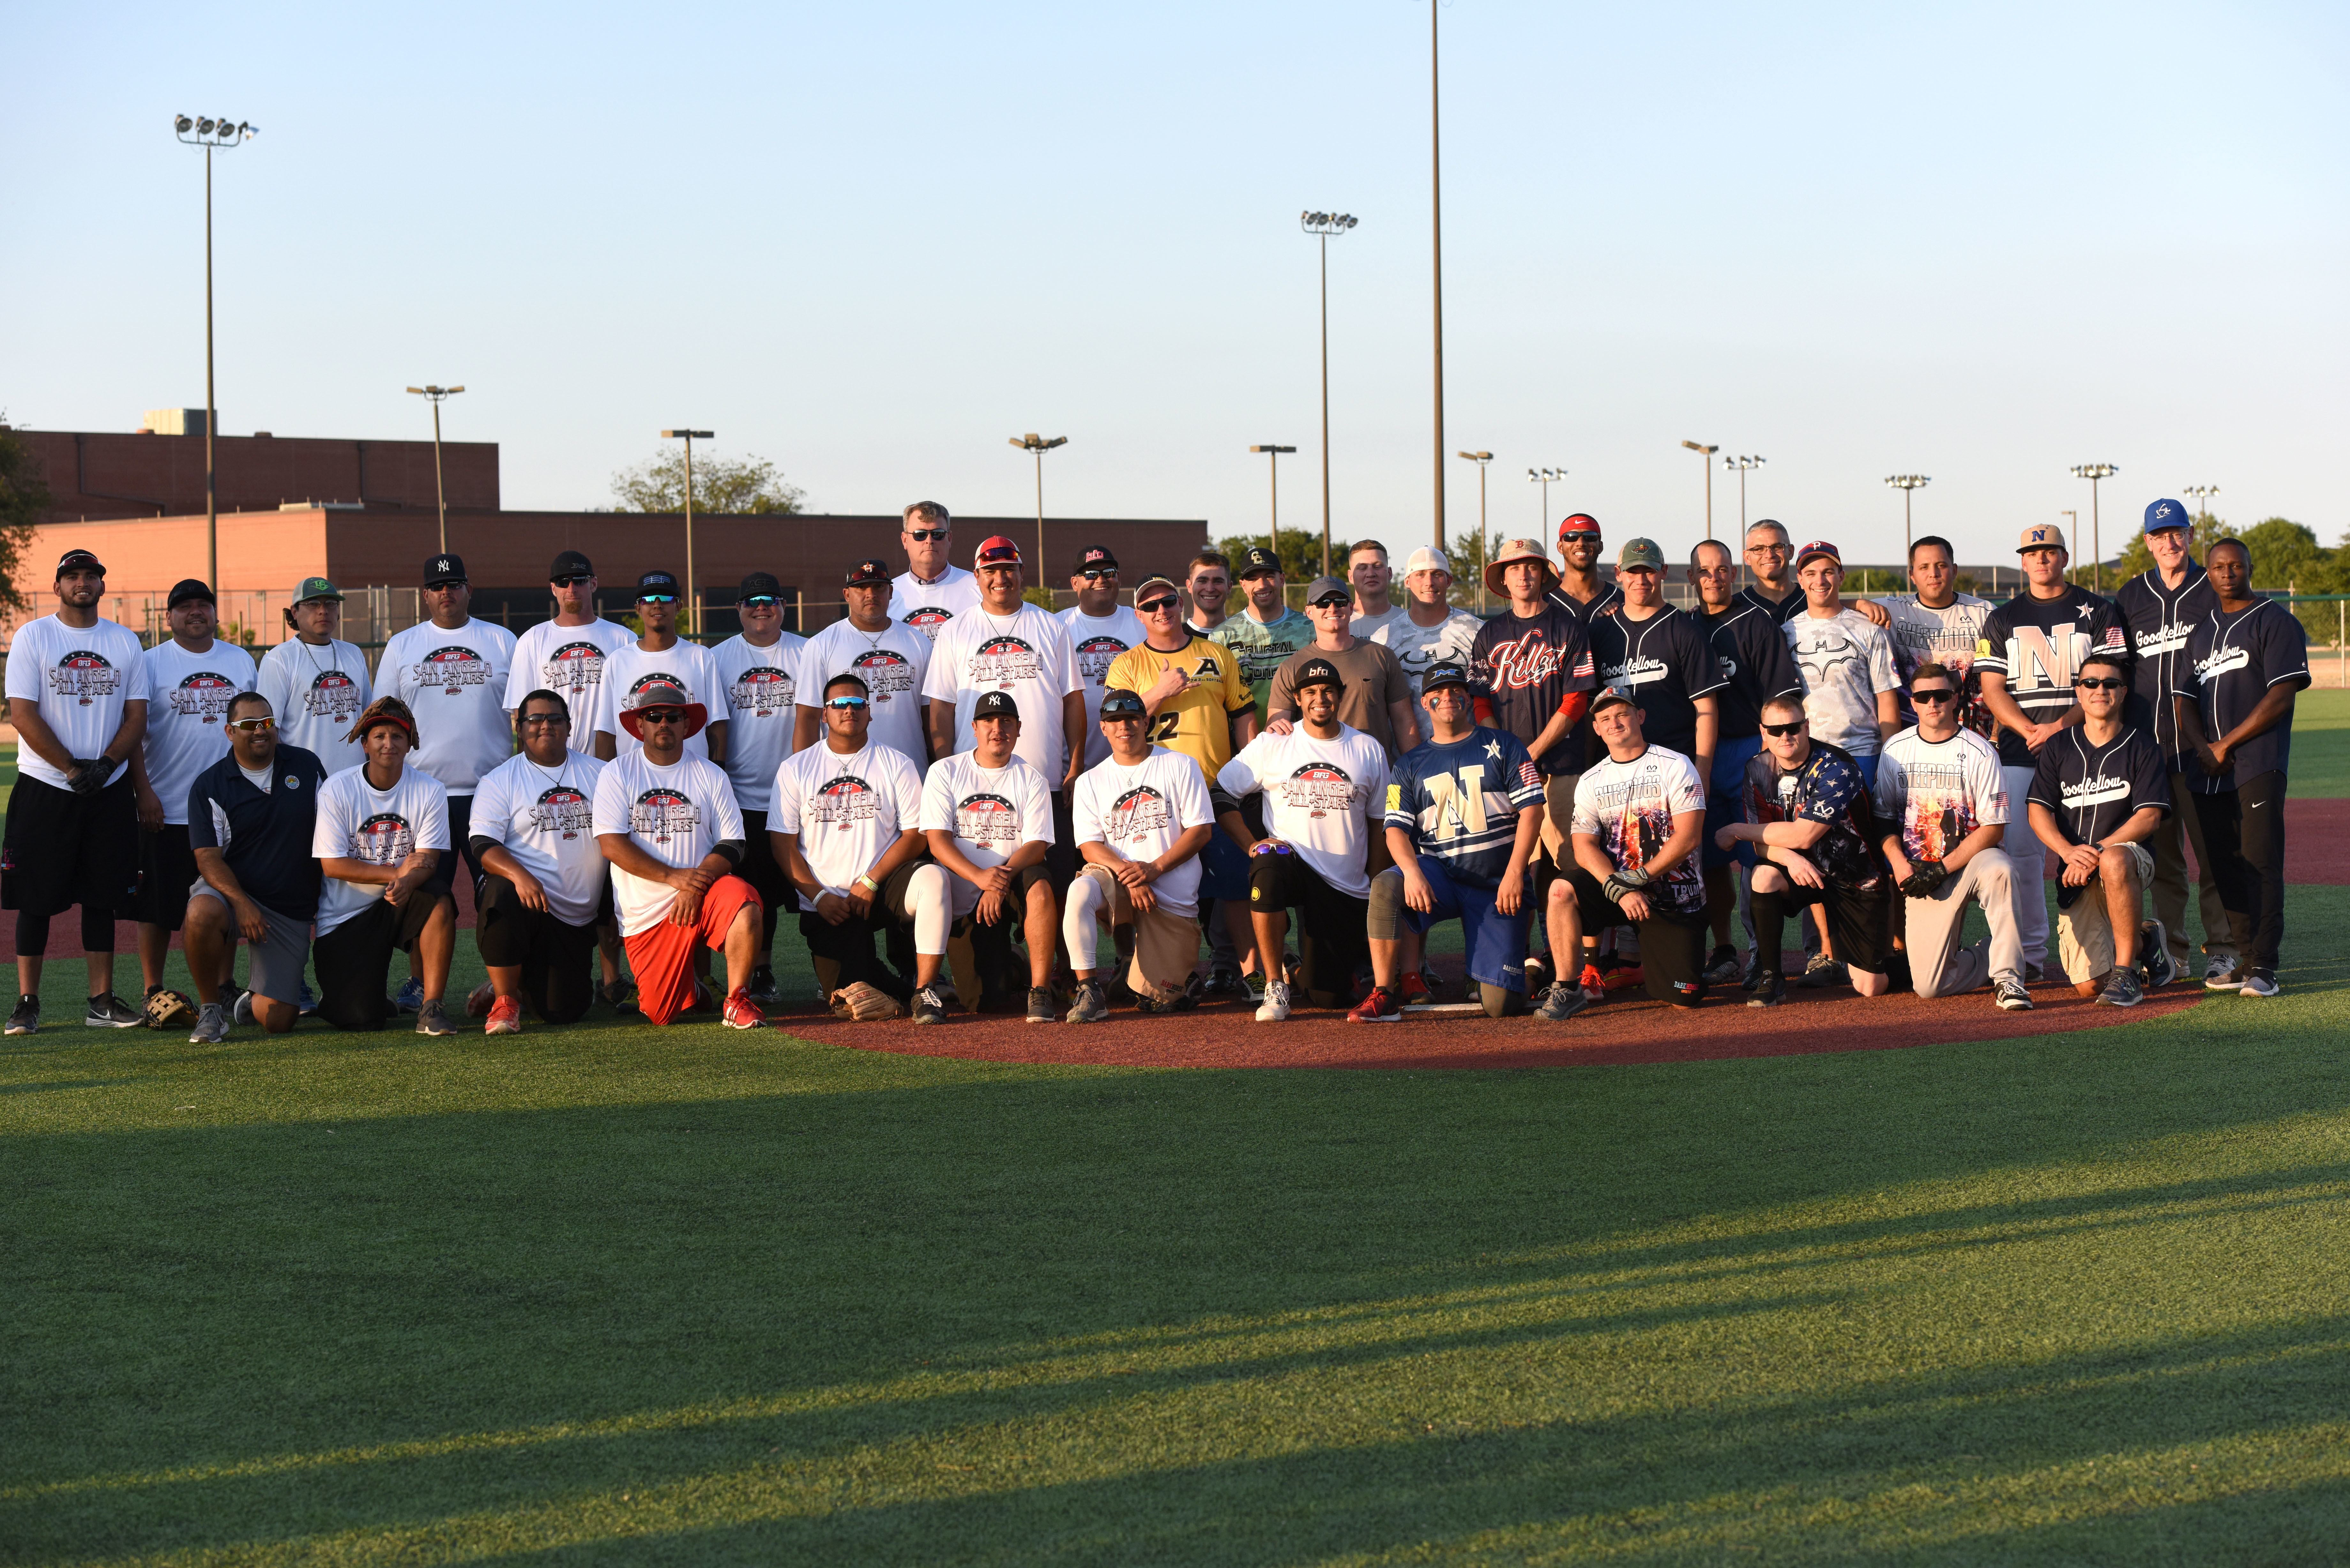 The FCA All-Star softball game at Mayer Field in San Angelo